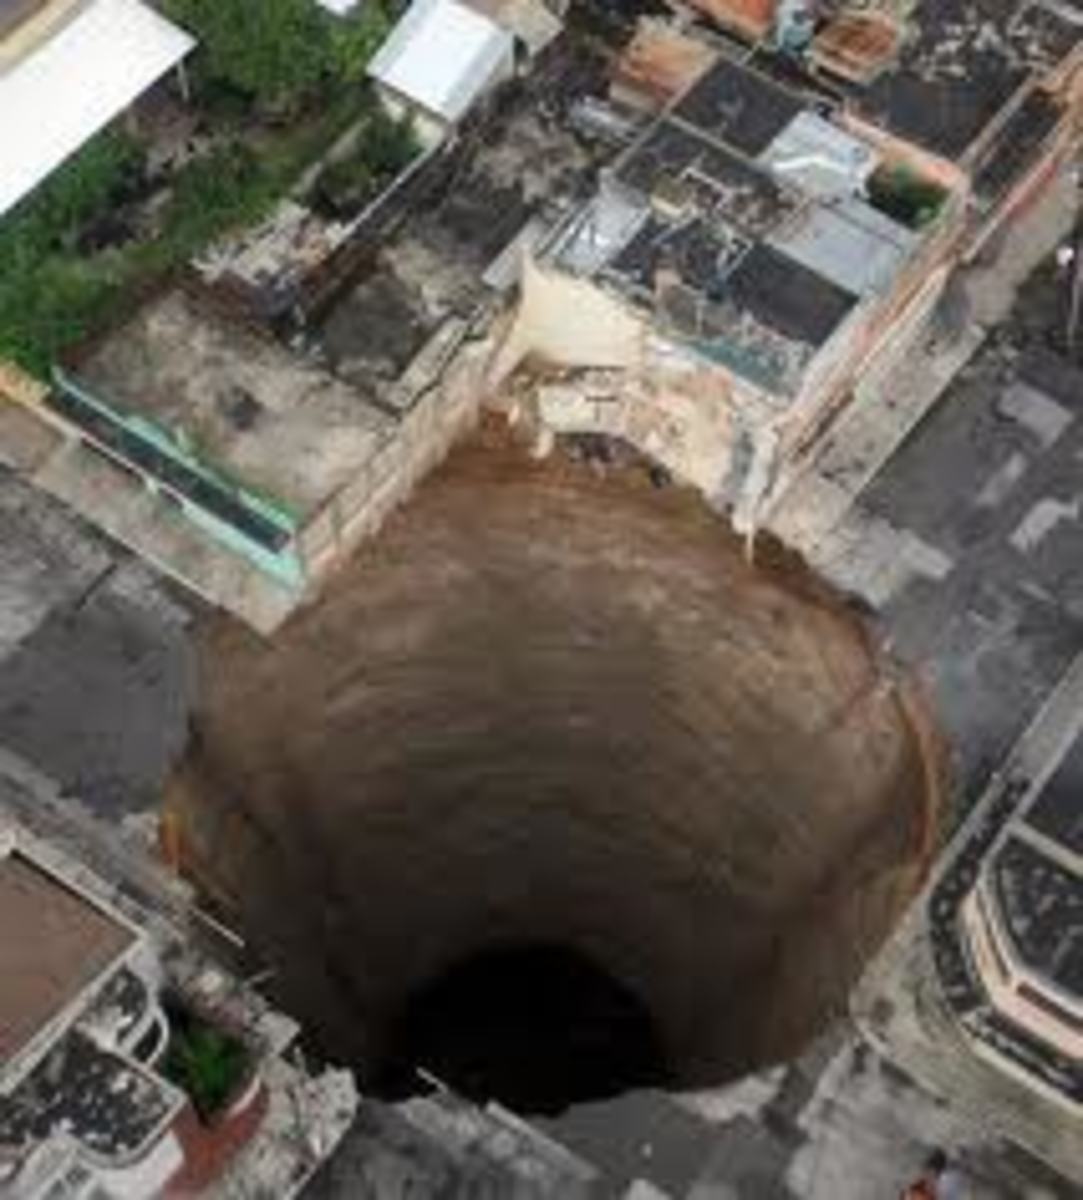 The almost perfect symmetry of this sinkhole Guatemala is amazing. 